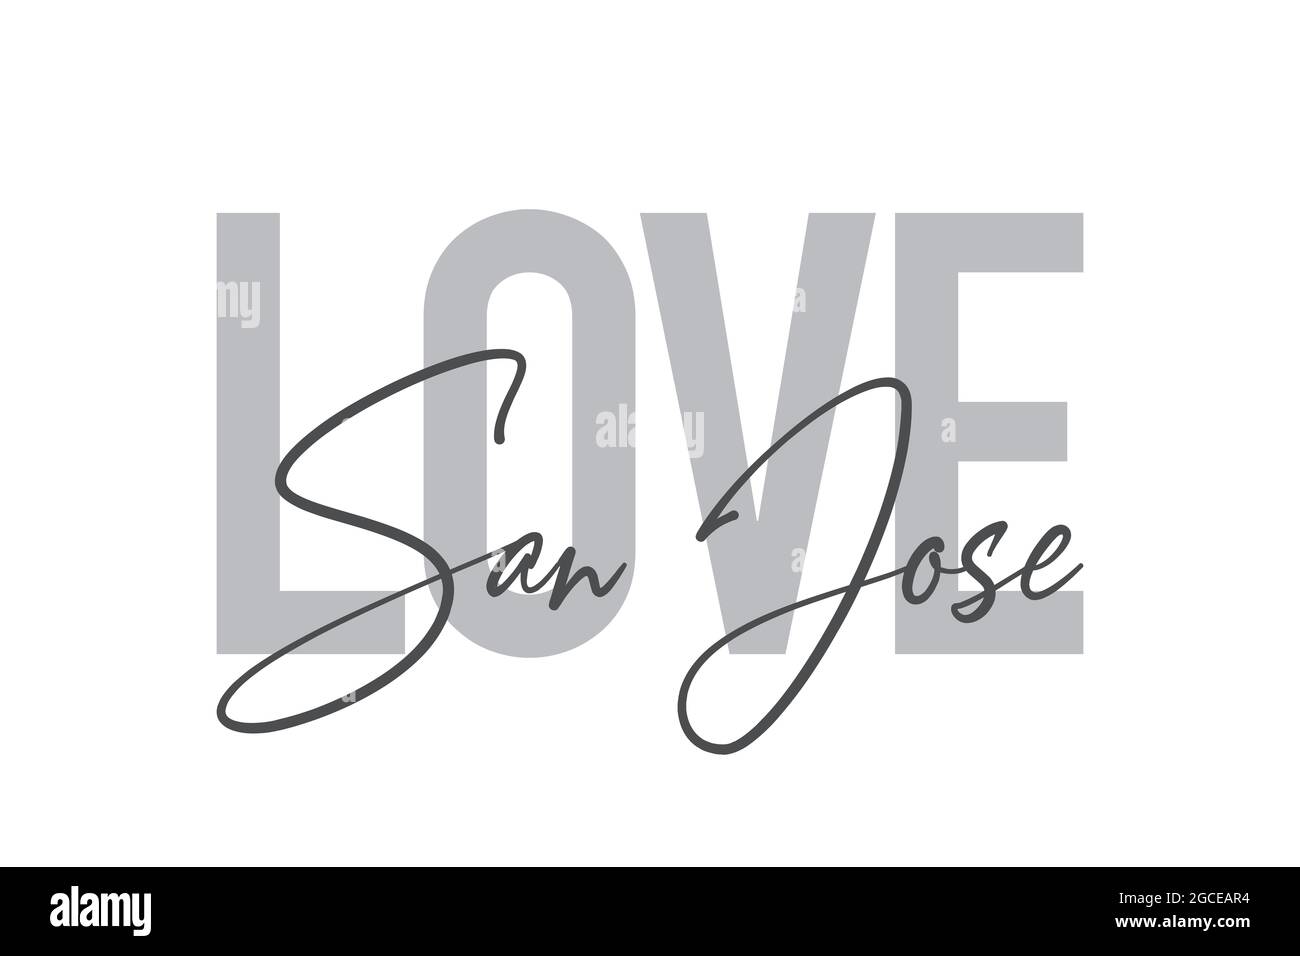 Modern, simple, minimal typographic design of a saying 'Love San Jose' in tones of grey color. Cool, urban, trendy and playful graphic vector art with Stock Photo